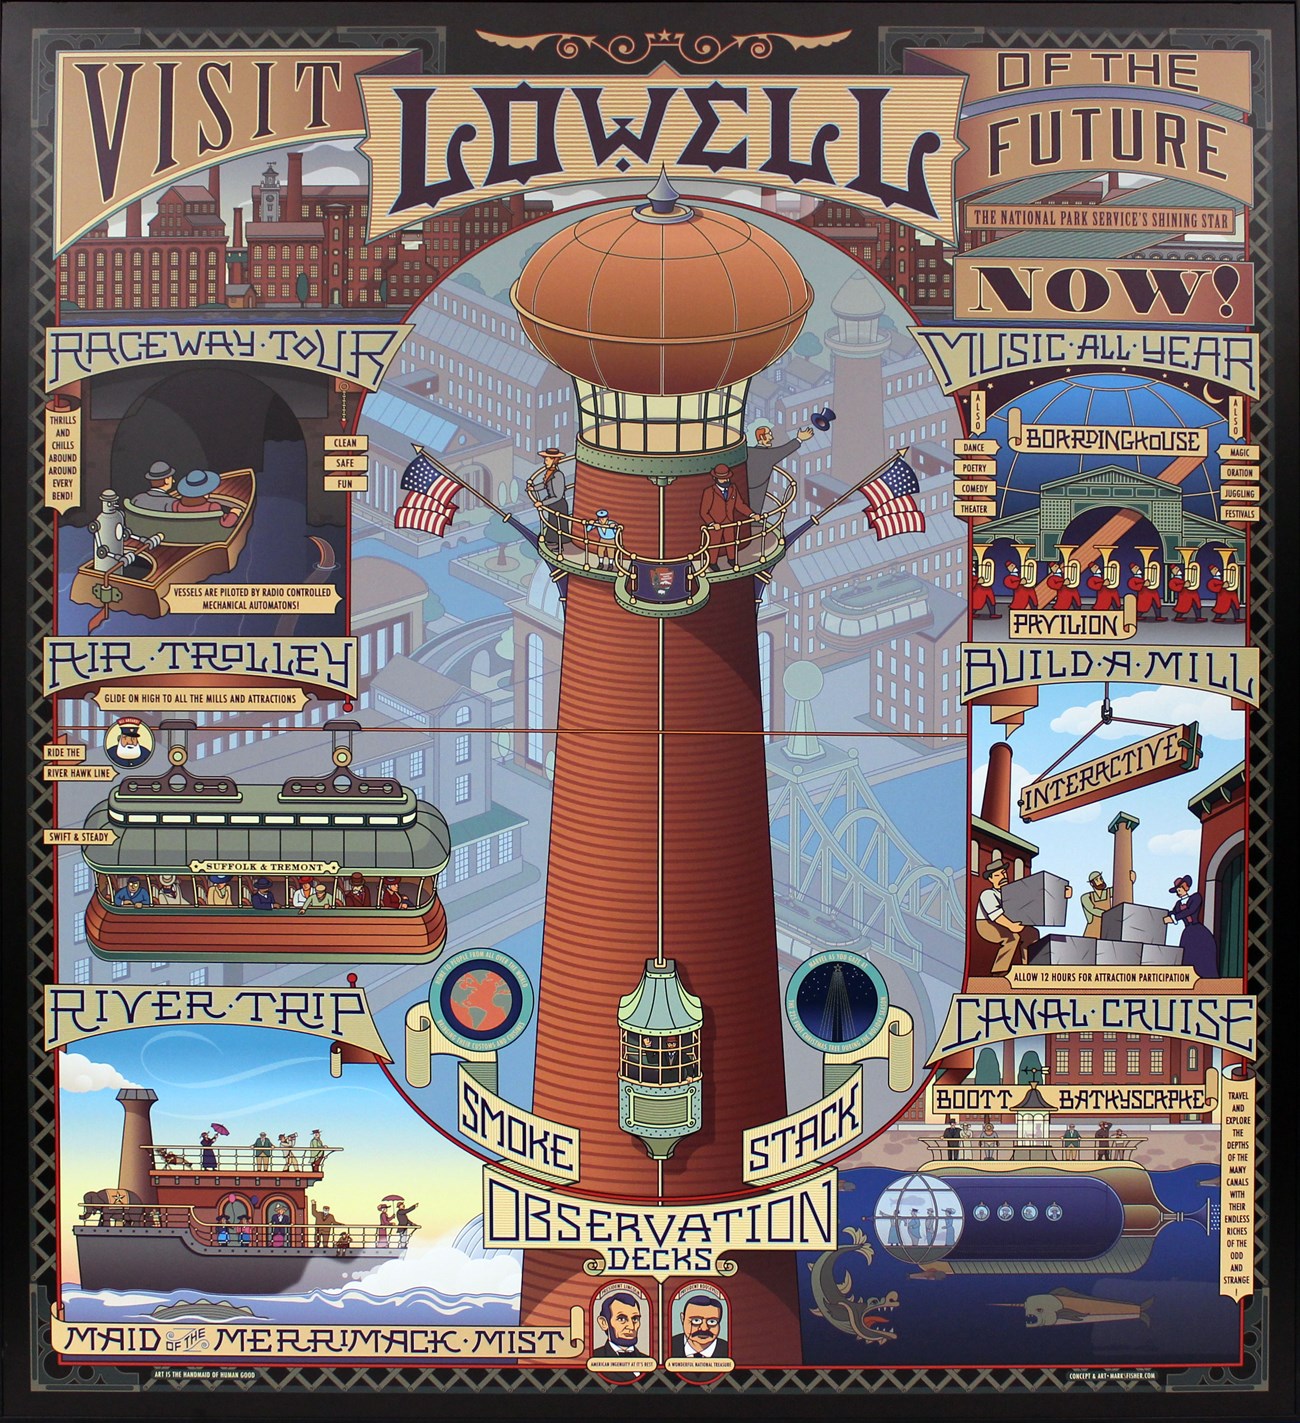 A smokestack observation deck is in the center of a poster-collage. "Visit Lowell of the Future Now!"adorns futuristic steampunk-inspired scenes of the city.